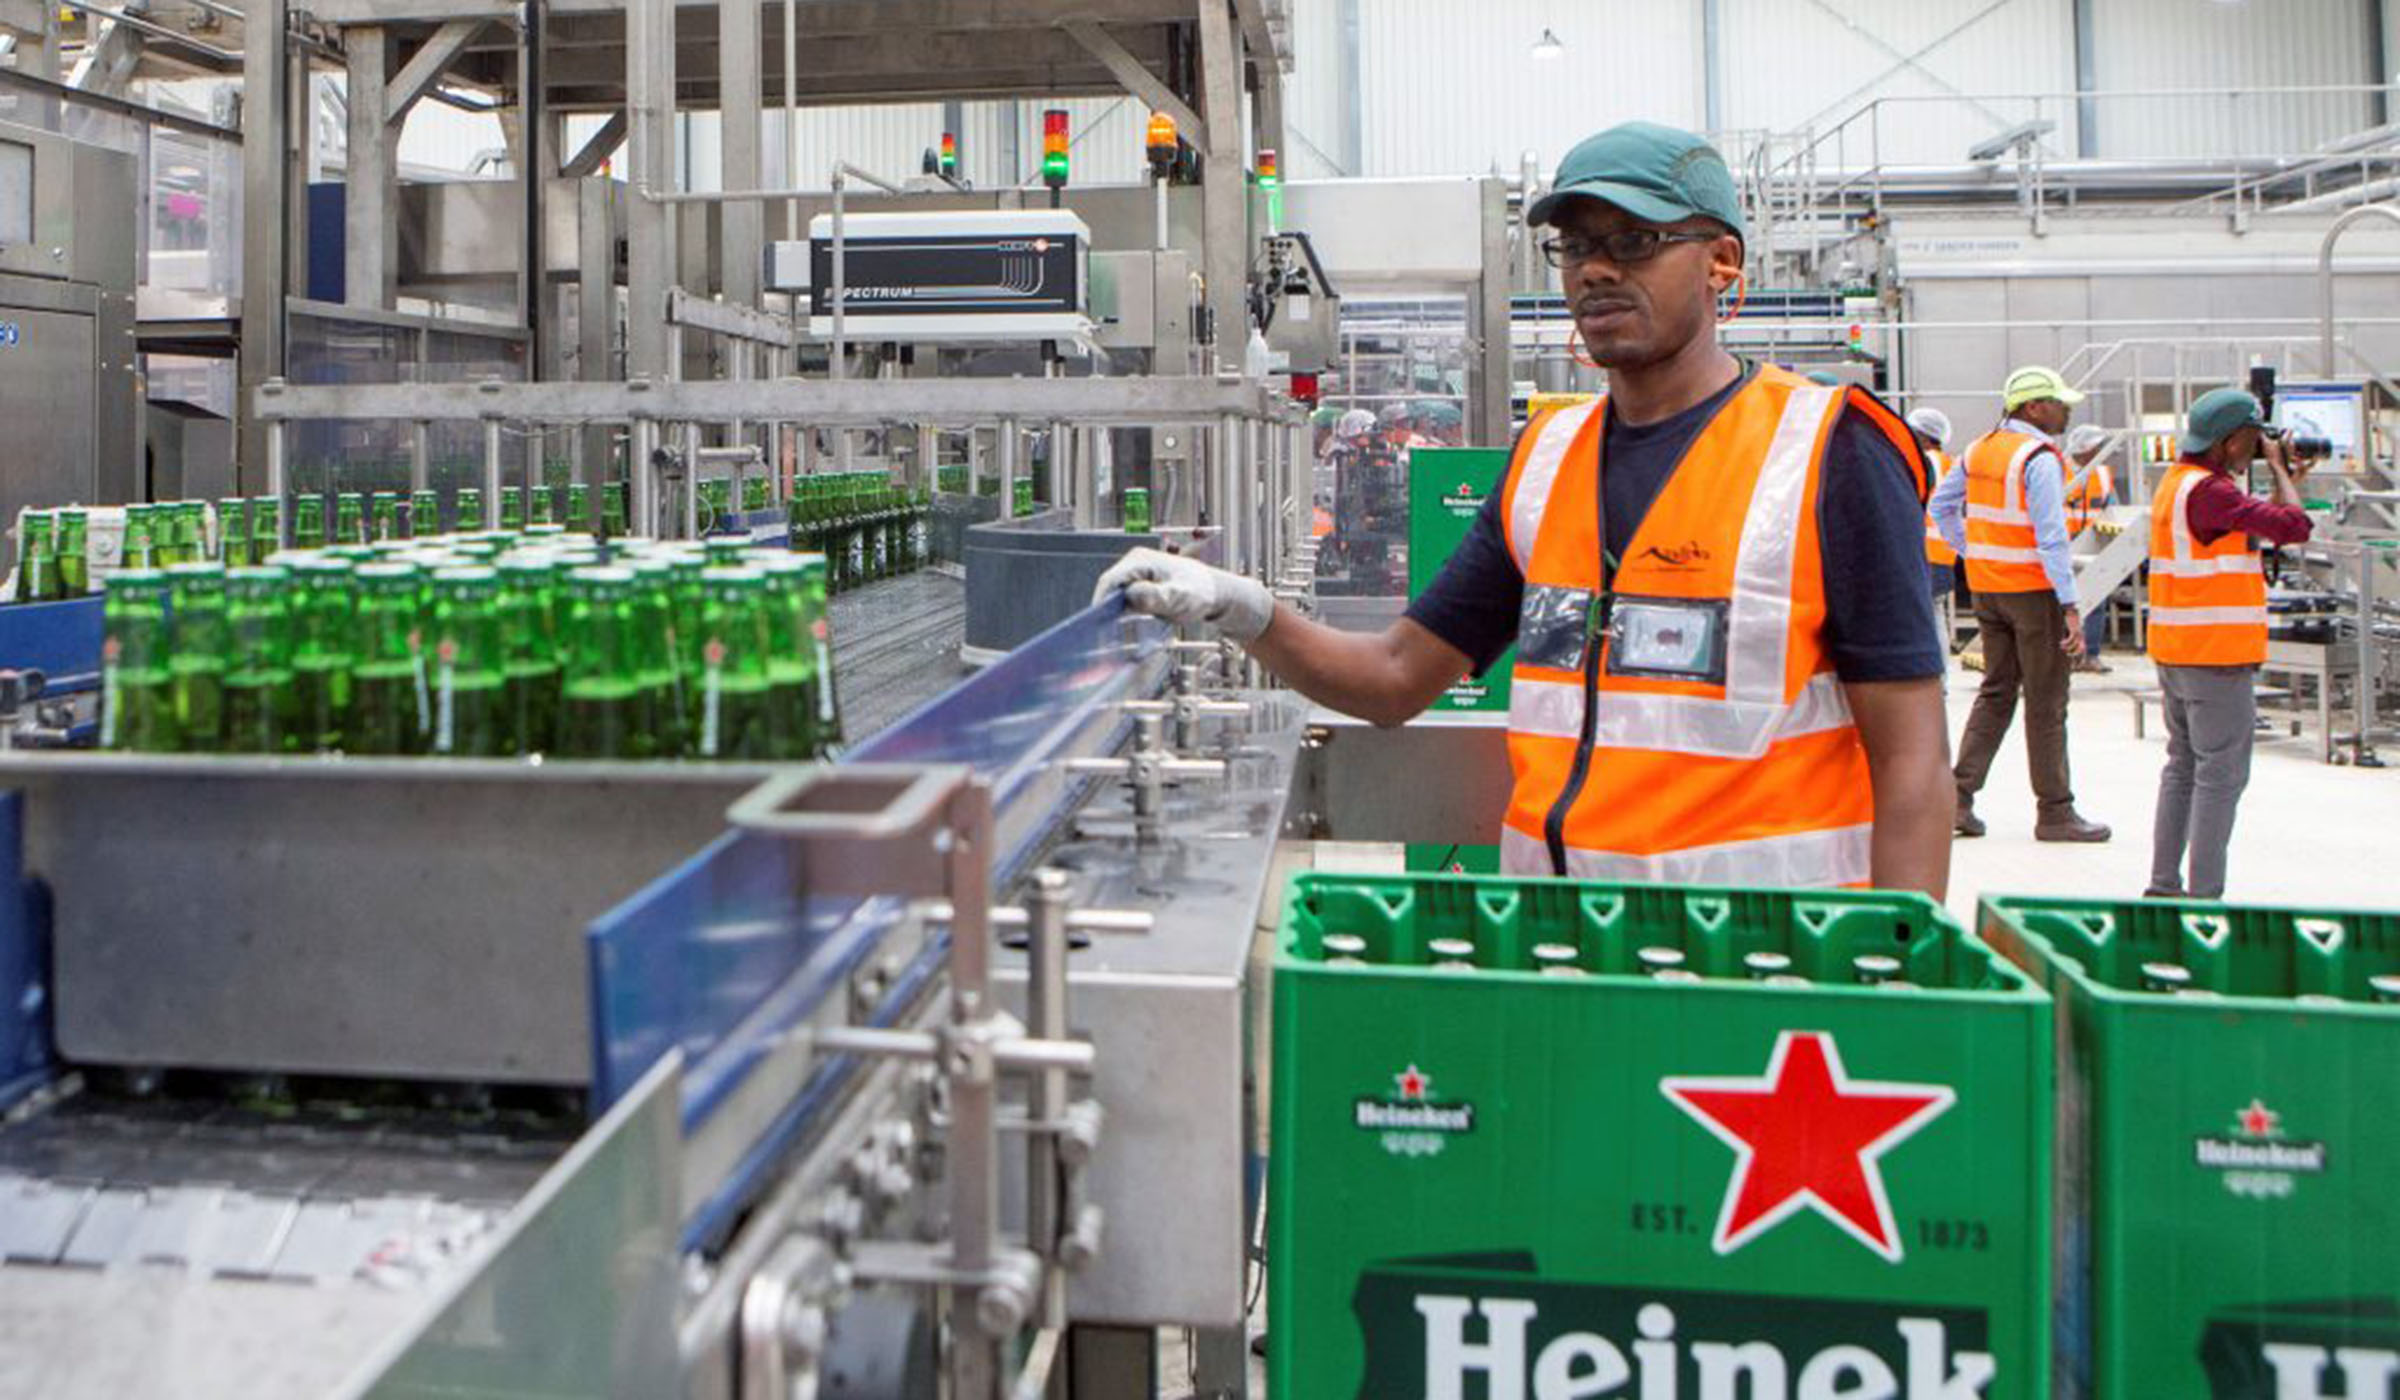 Among the major investments by Bralirwa last year include setting up installations to produce the new Made-in-Rwanda Heineken beer which cost the local brewery about Euro 9M. Net photo.